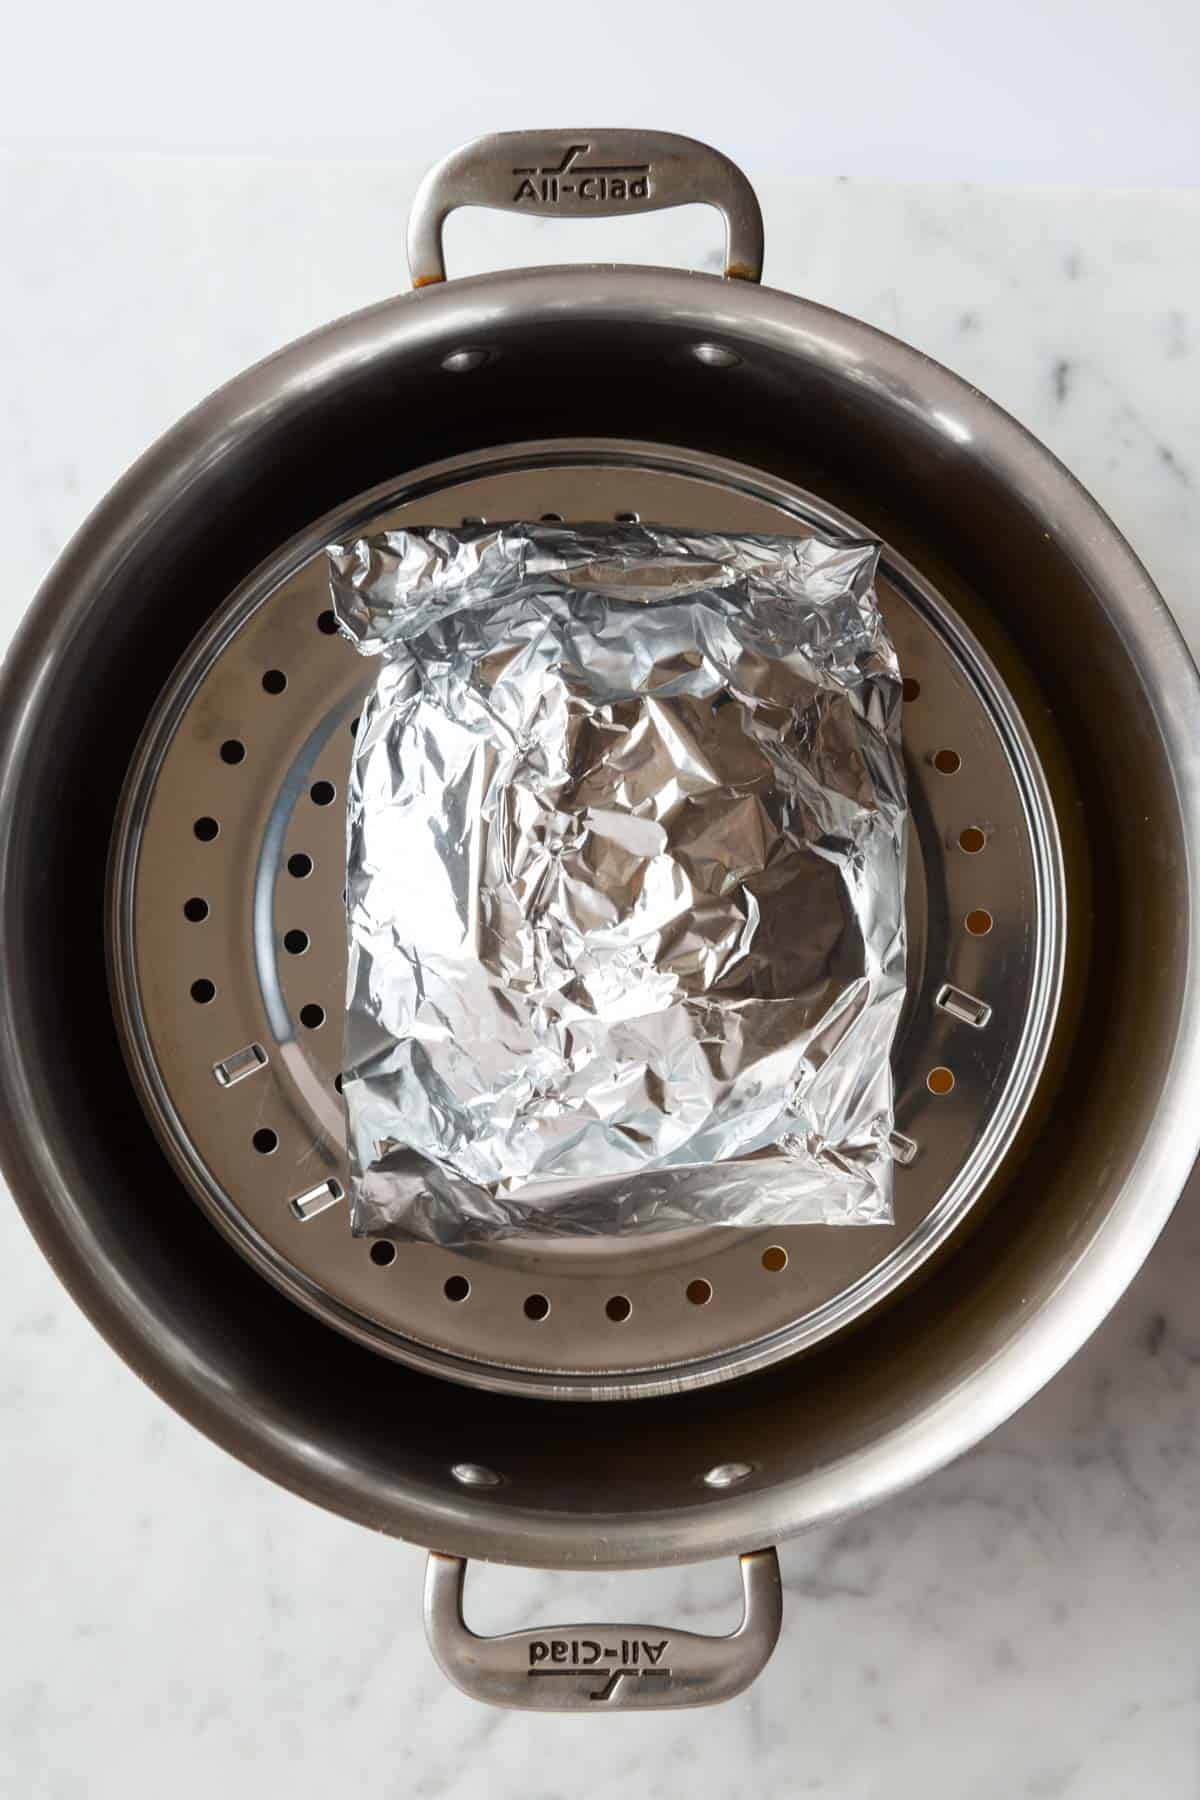 Seitan in aluminum foil being placed on steaming basket in a stainless steel saucepan.